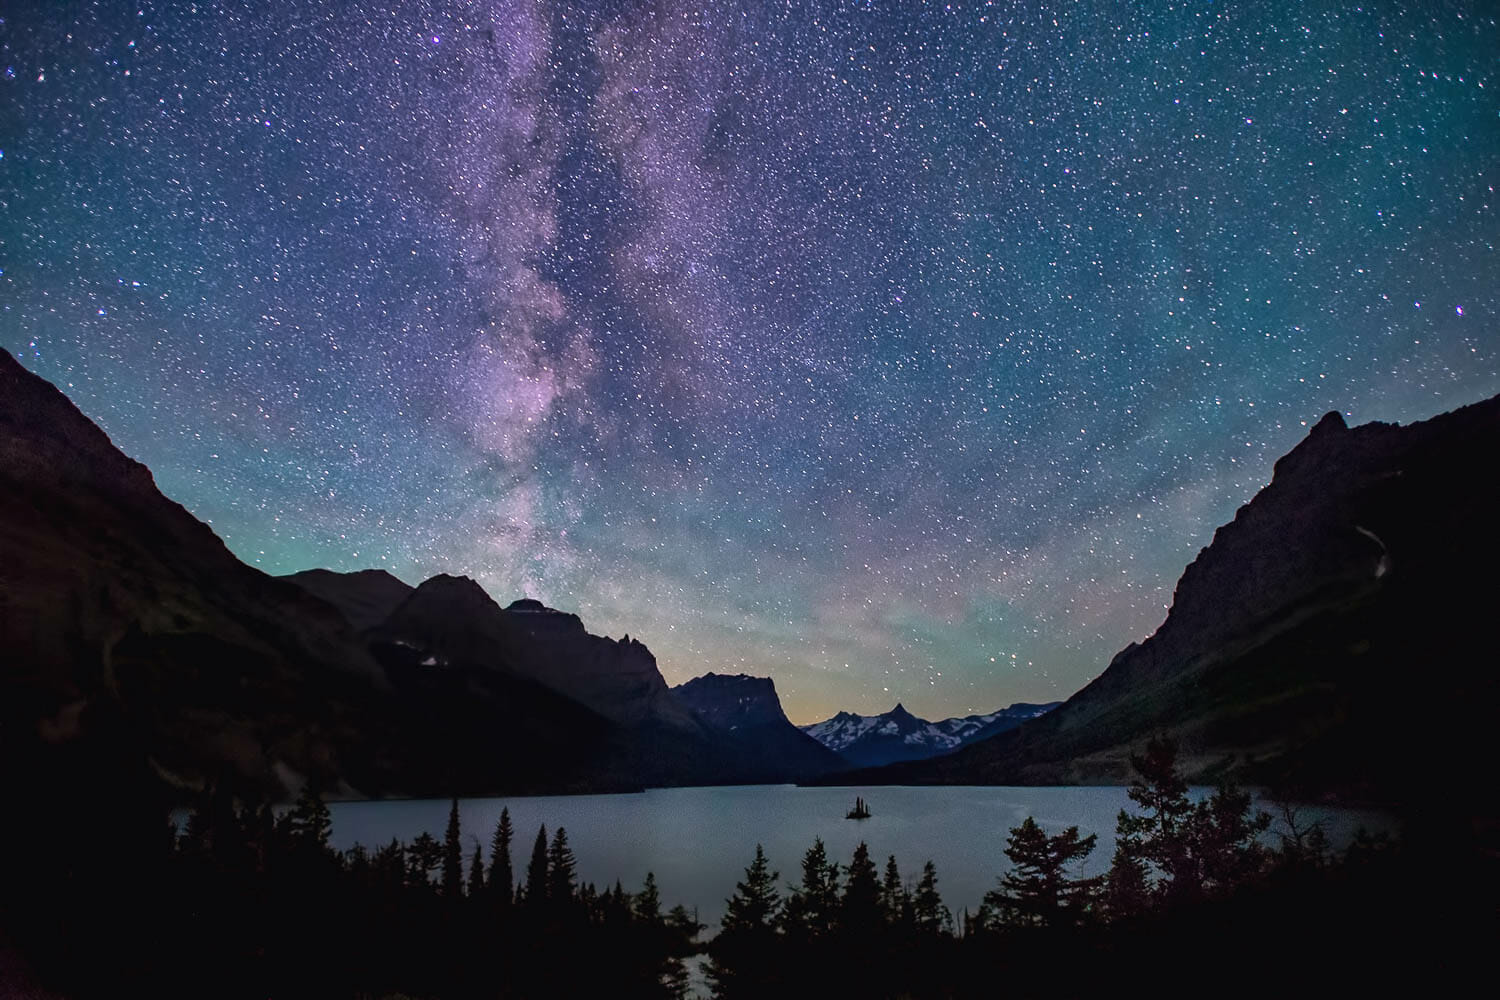 The Milky Way above Saint Mary Lake in Glacier National Park